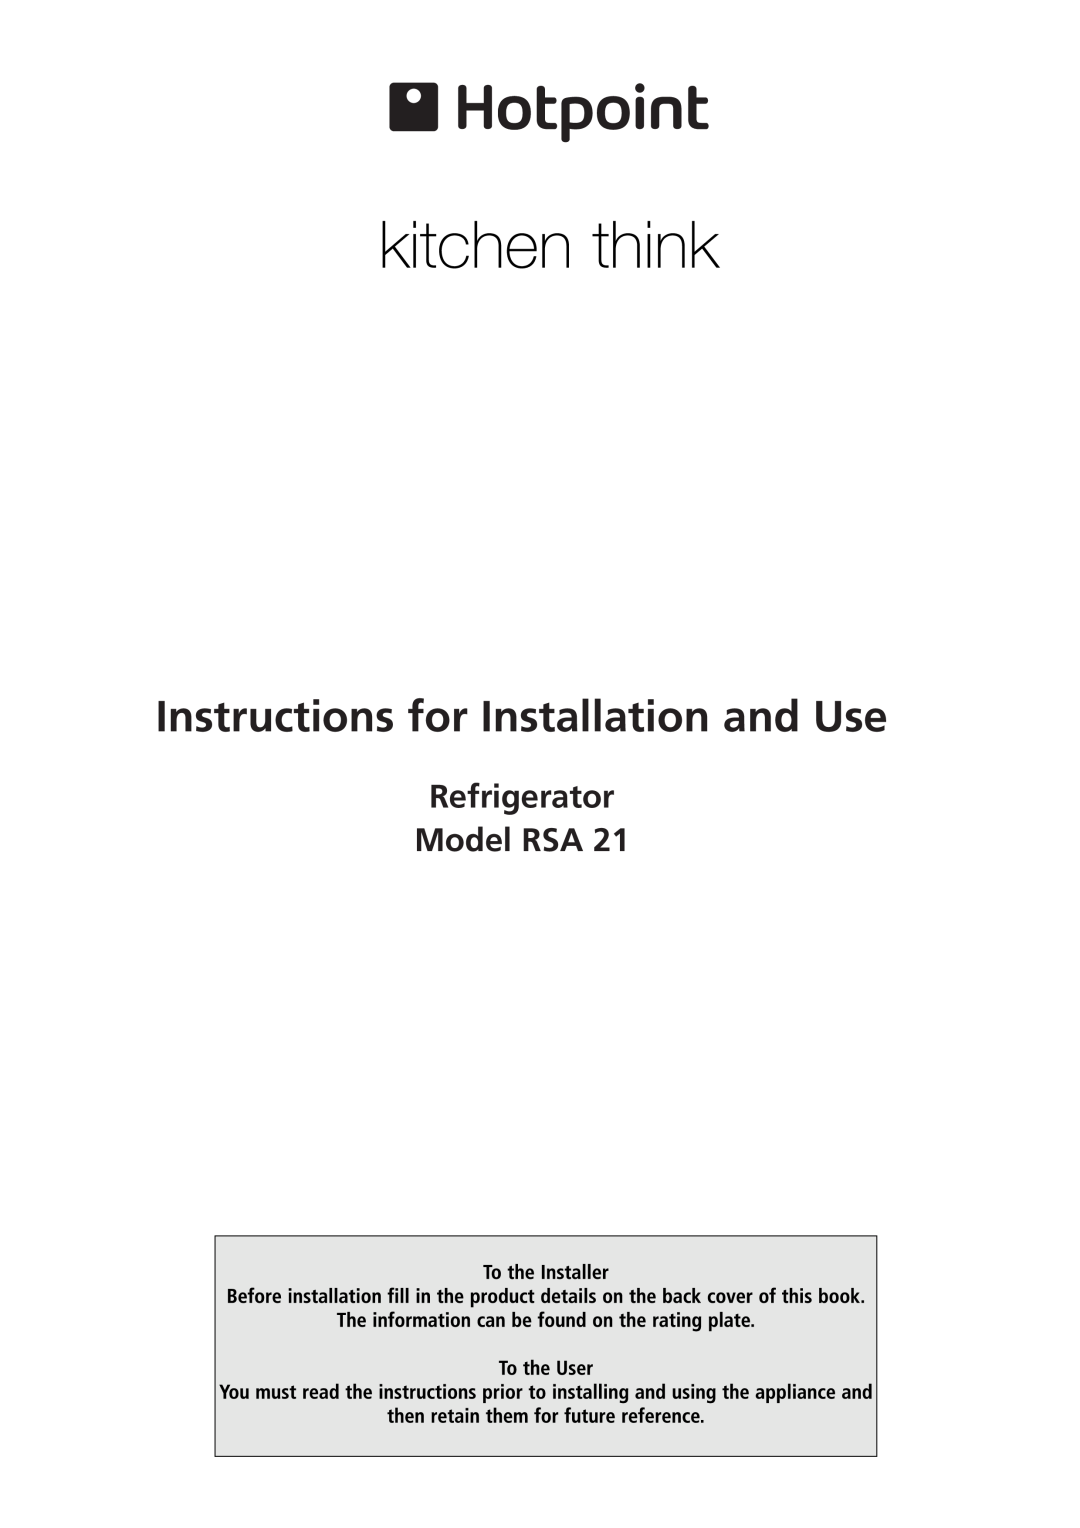 Hotpoint RSA 21 manual Refrigerator Model RSA, Instructions for Installation and Use 